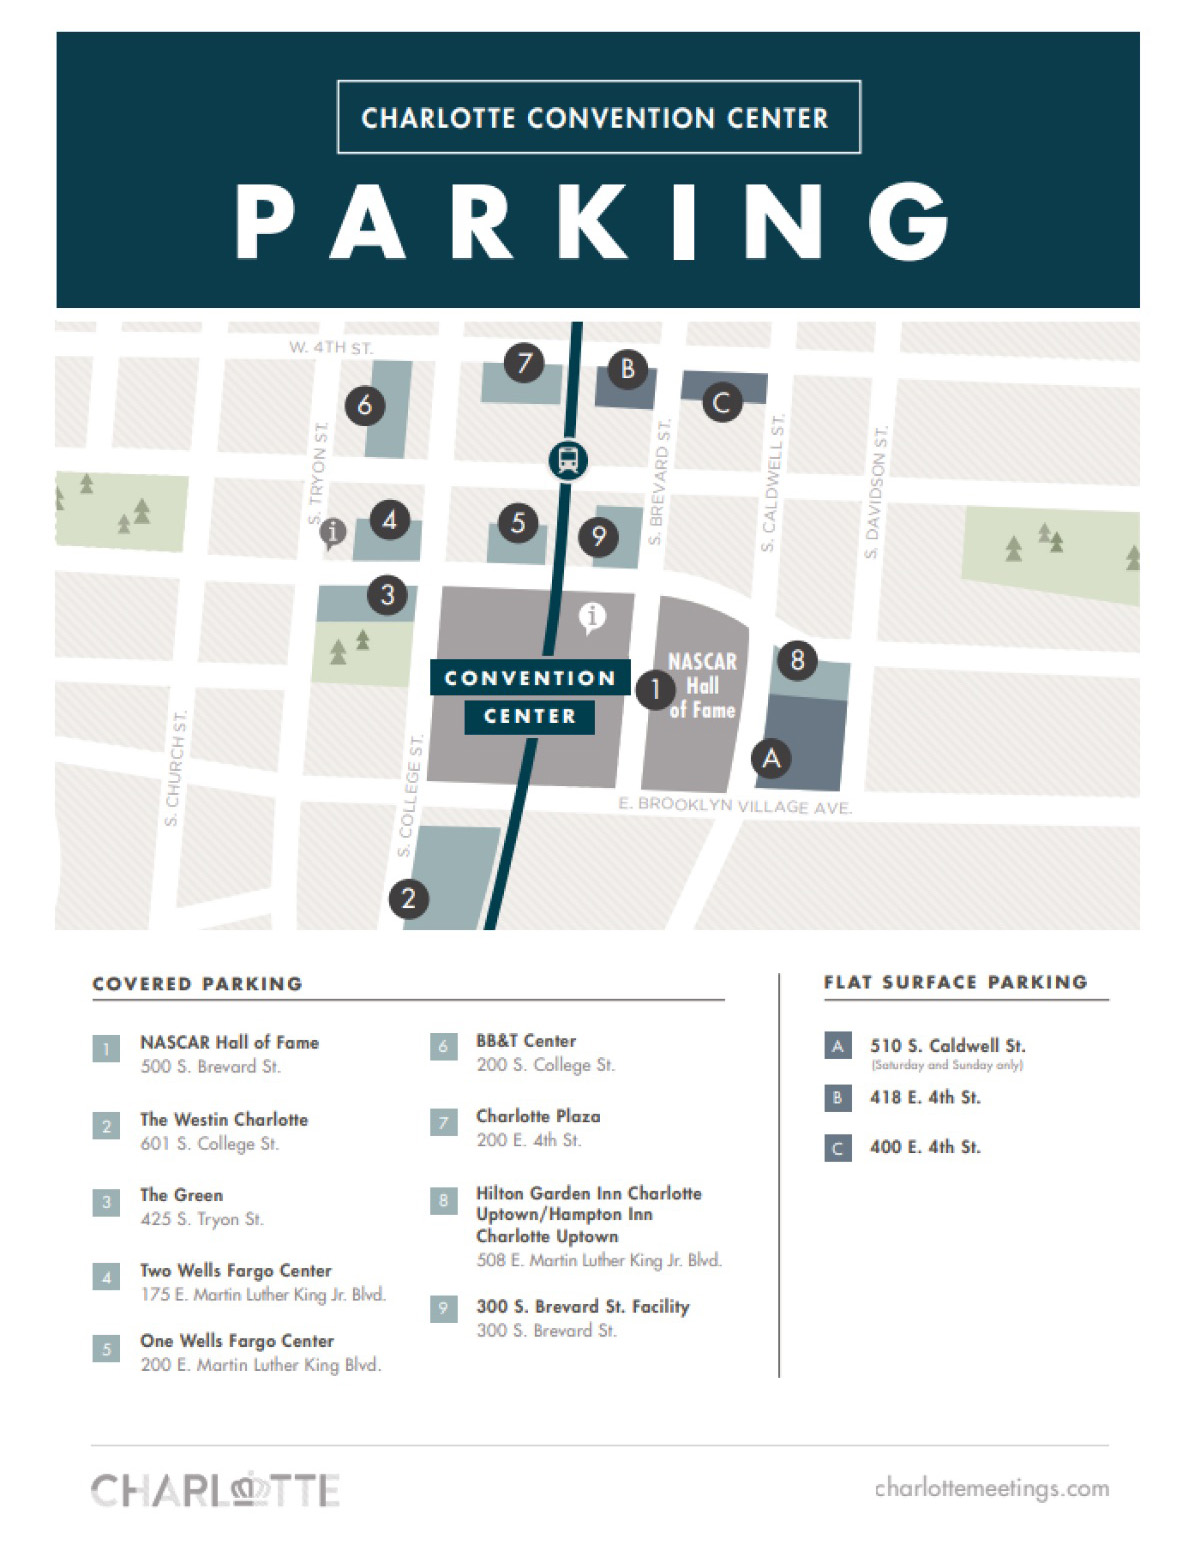 Parking Diagram for the Charlotte Convention Center